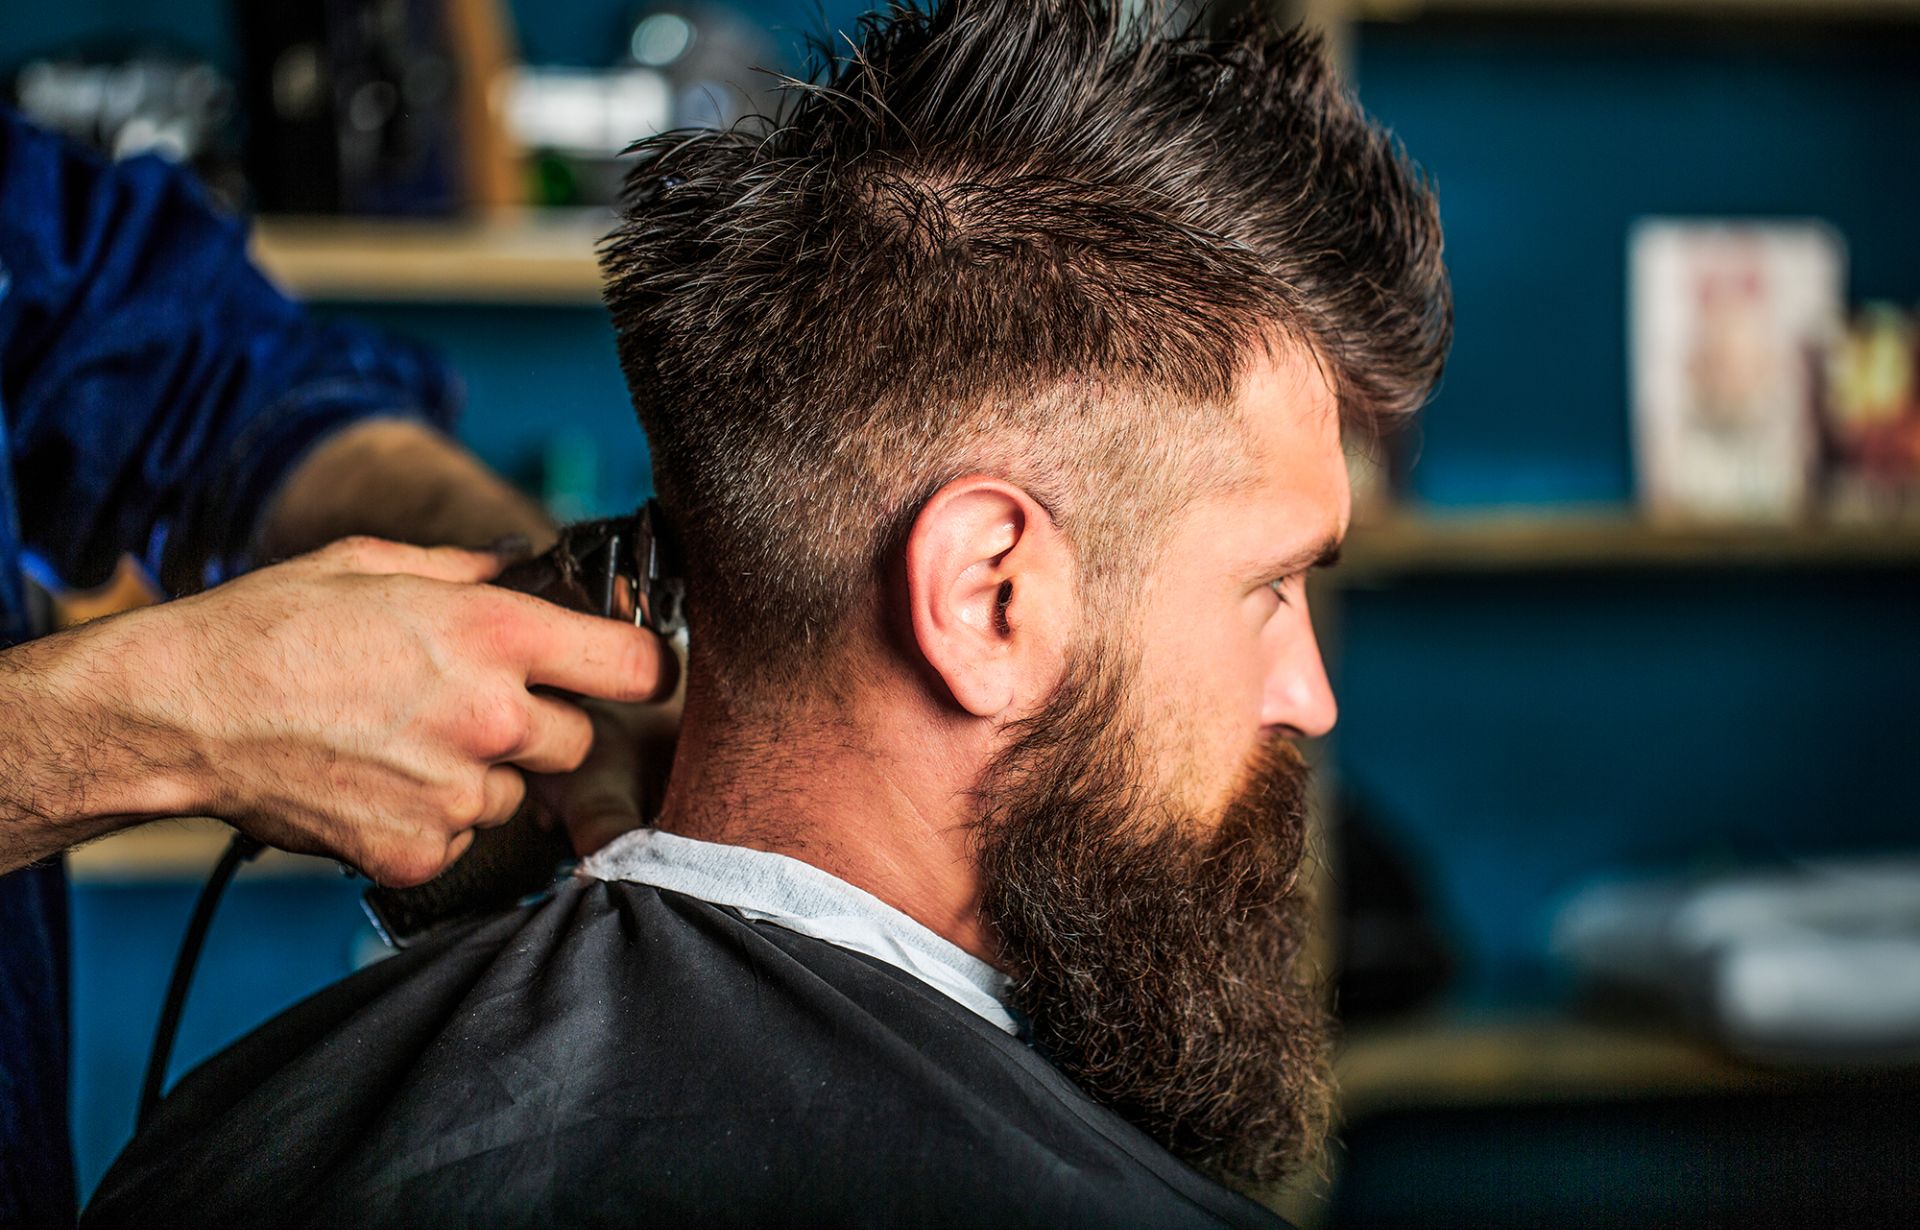 man-visiting-hairstylist-barbershop-barber-works-with-hair-clipper